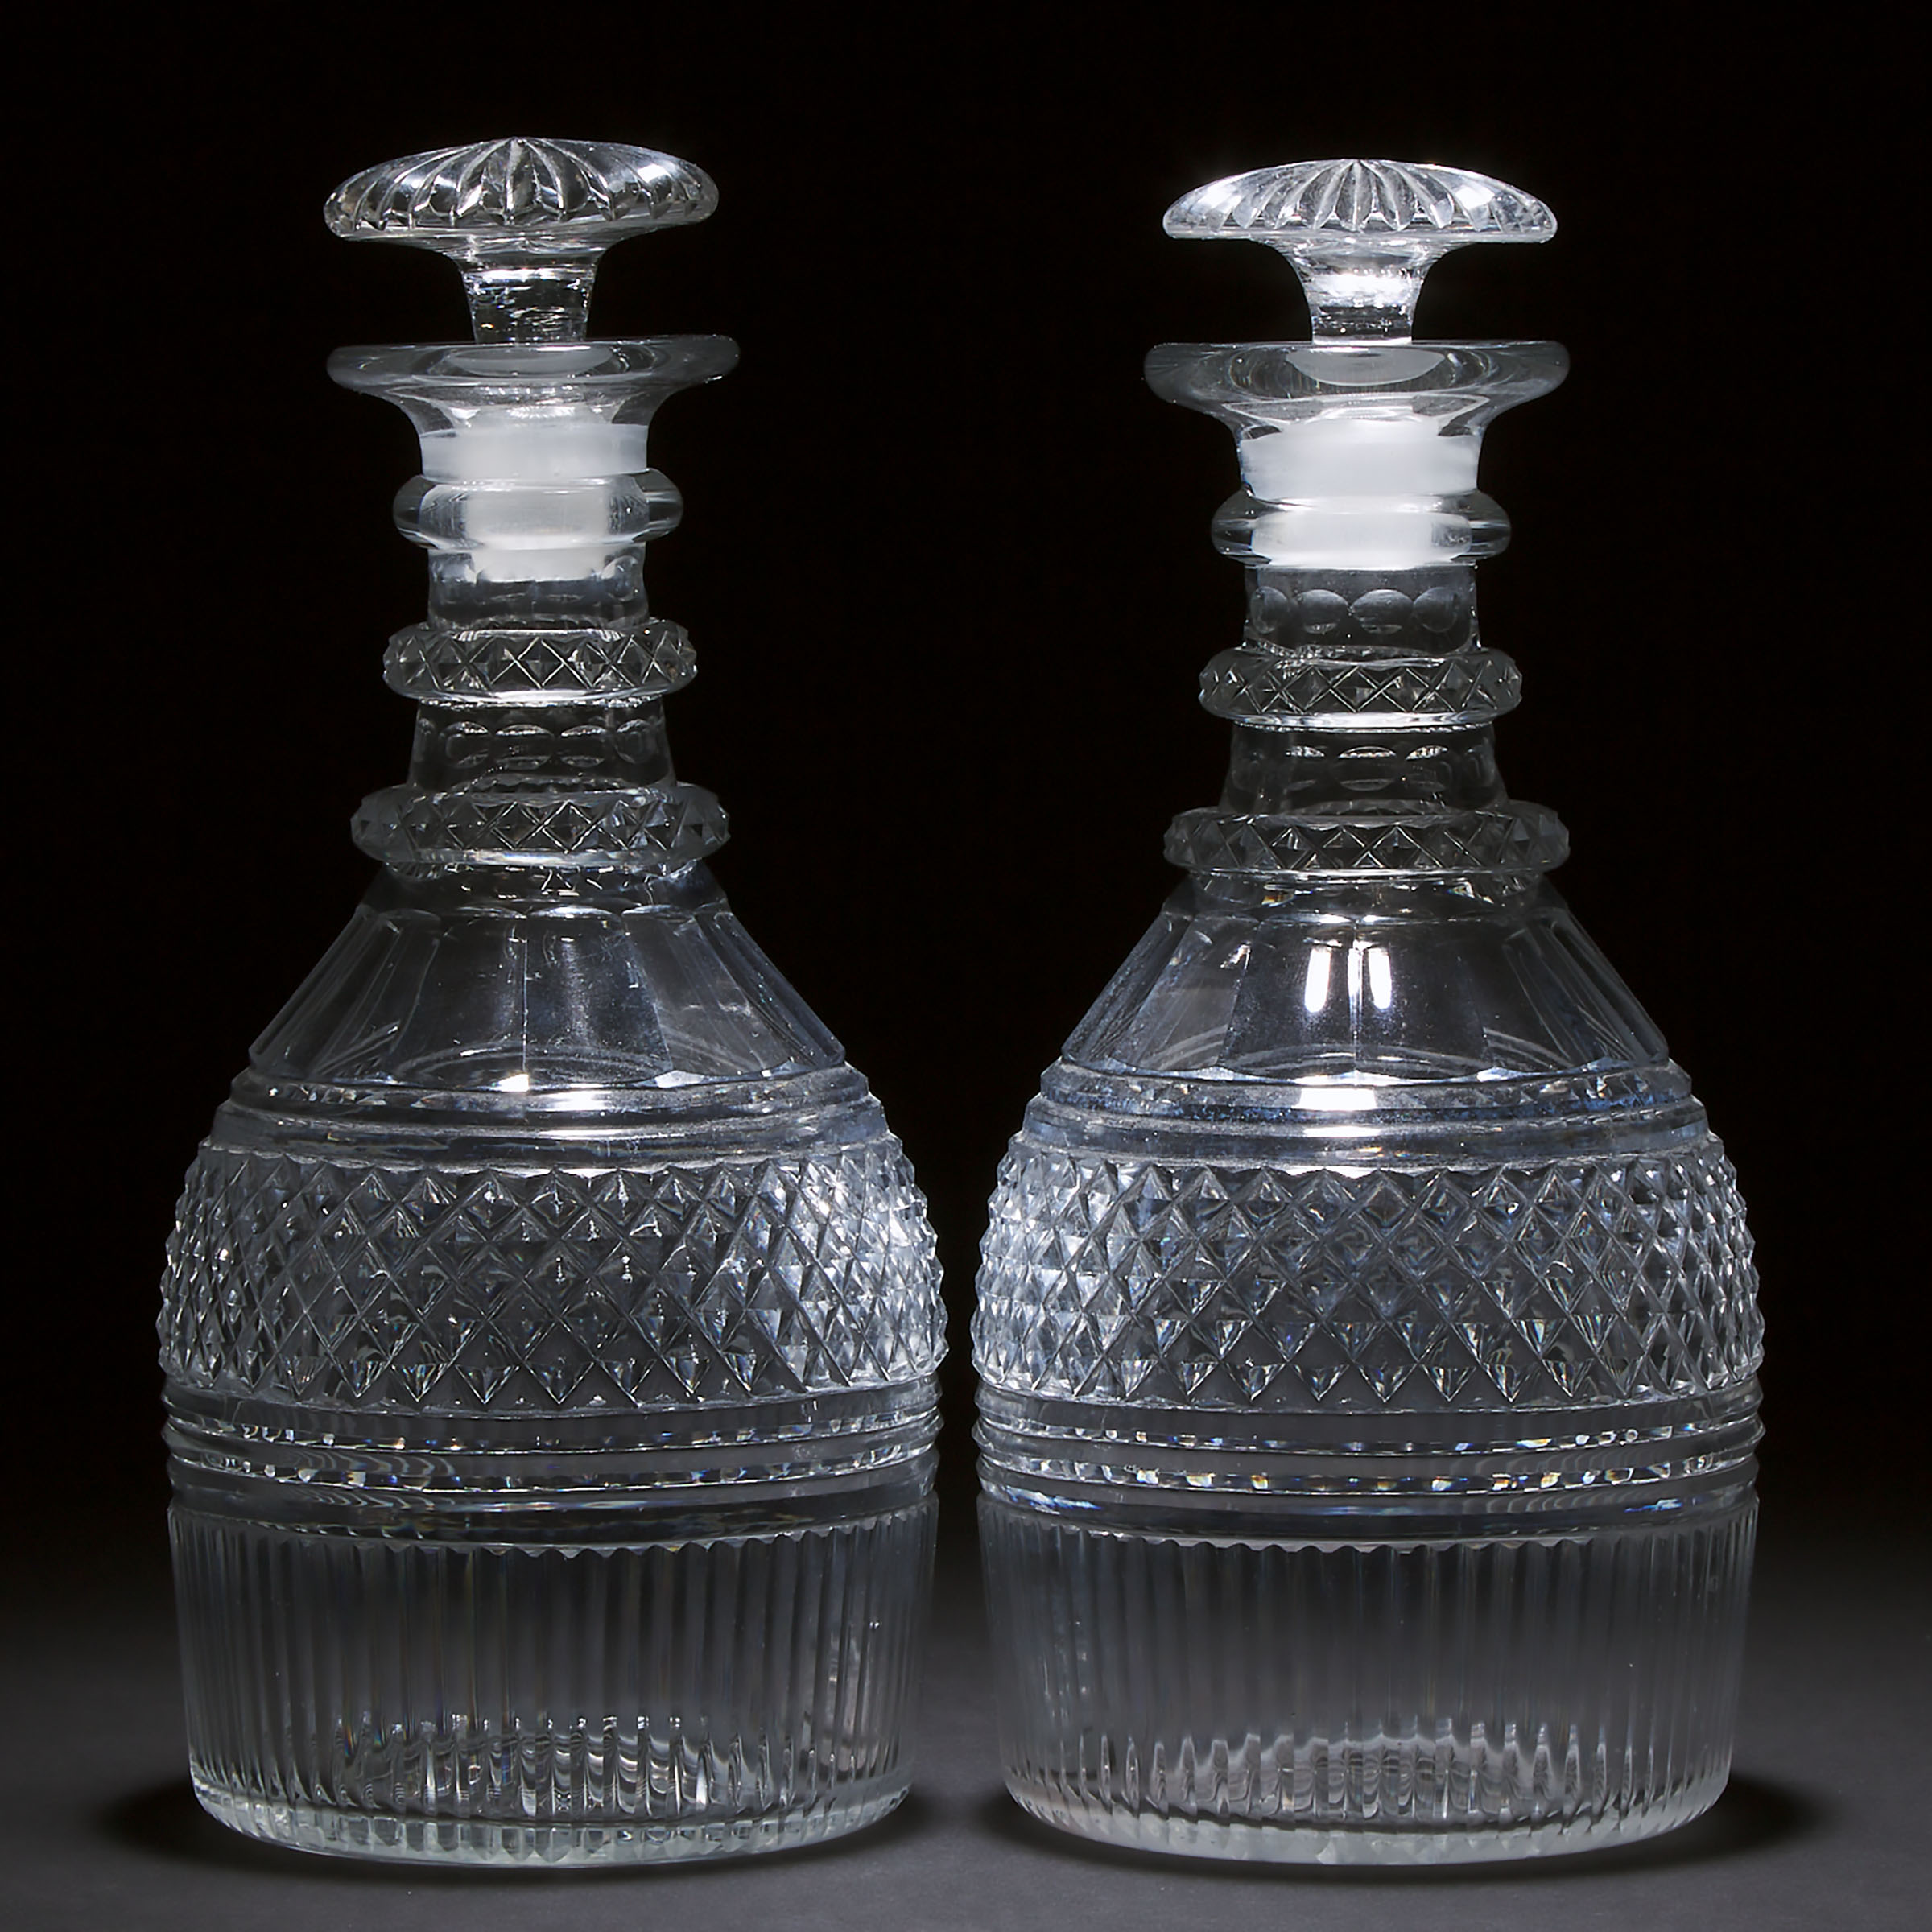 Pair of Anglo-Irish Cut Glass Decanters, early 19th century